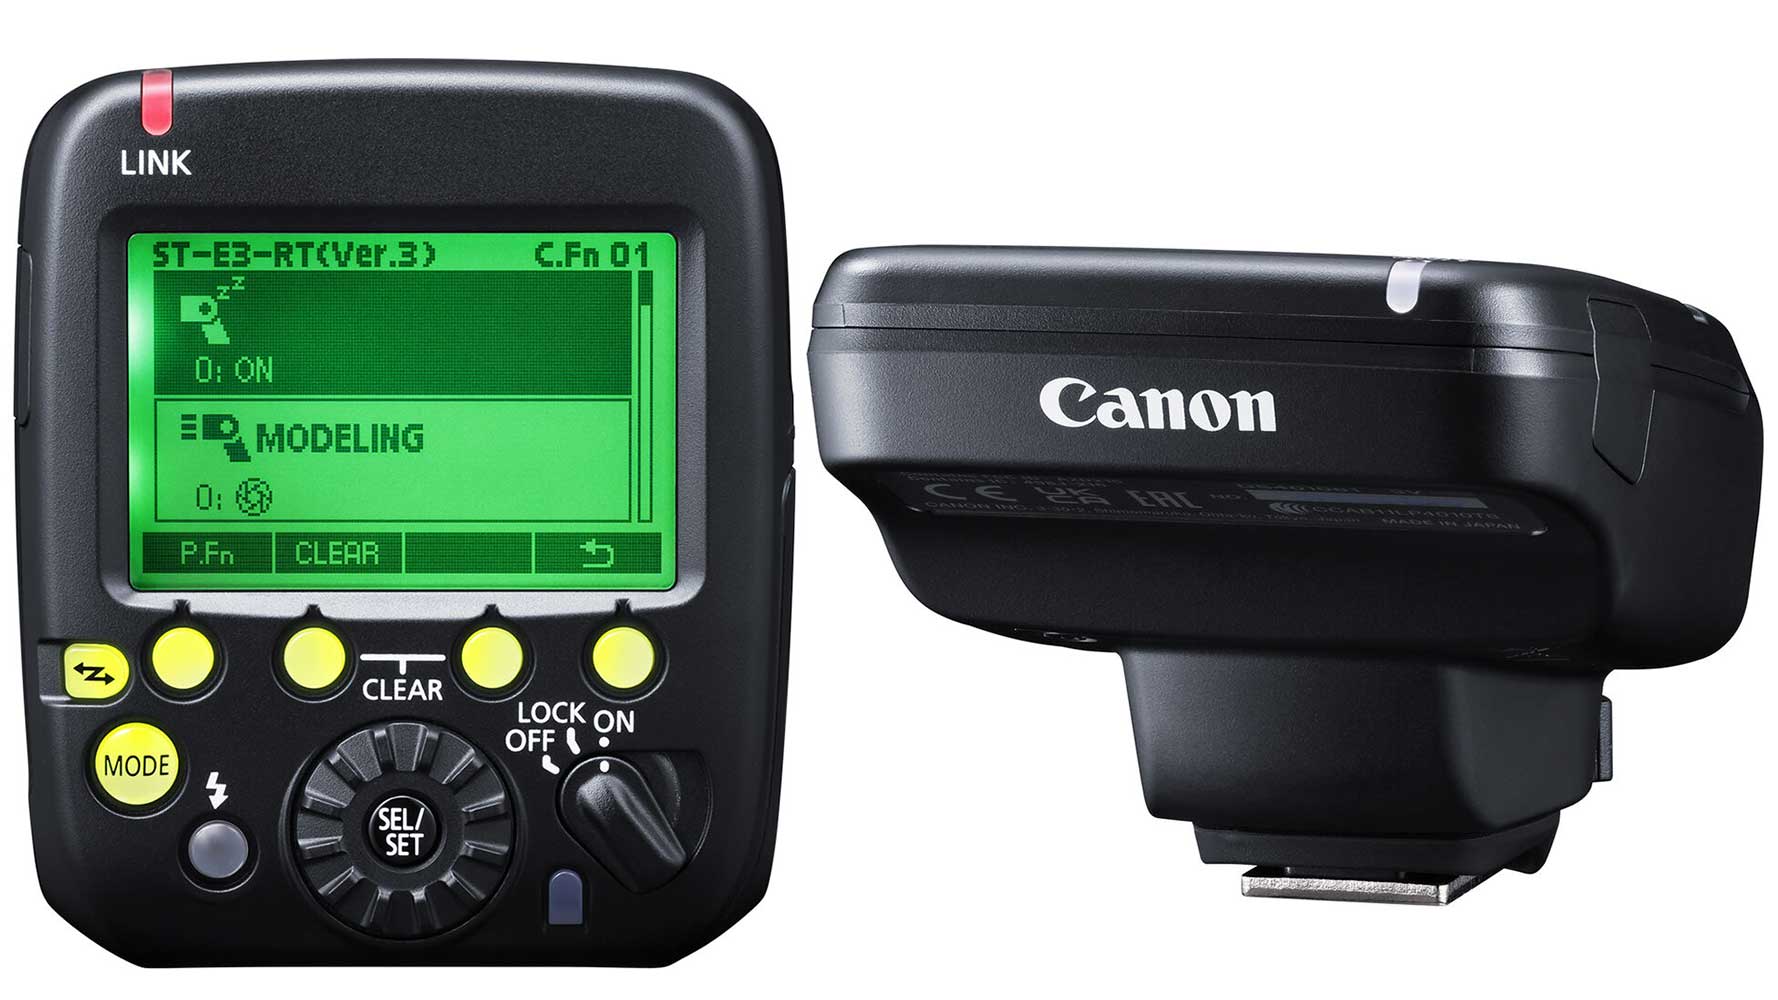 Canon quietly releases ST-E3-RT Version 3 flash trigger